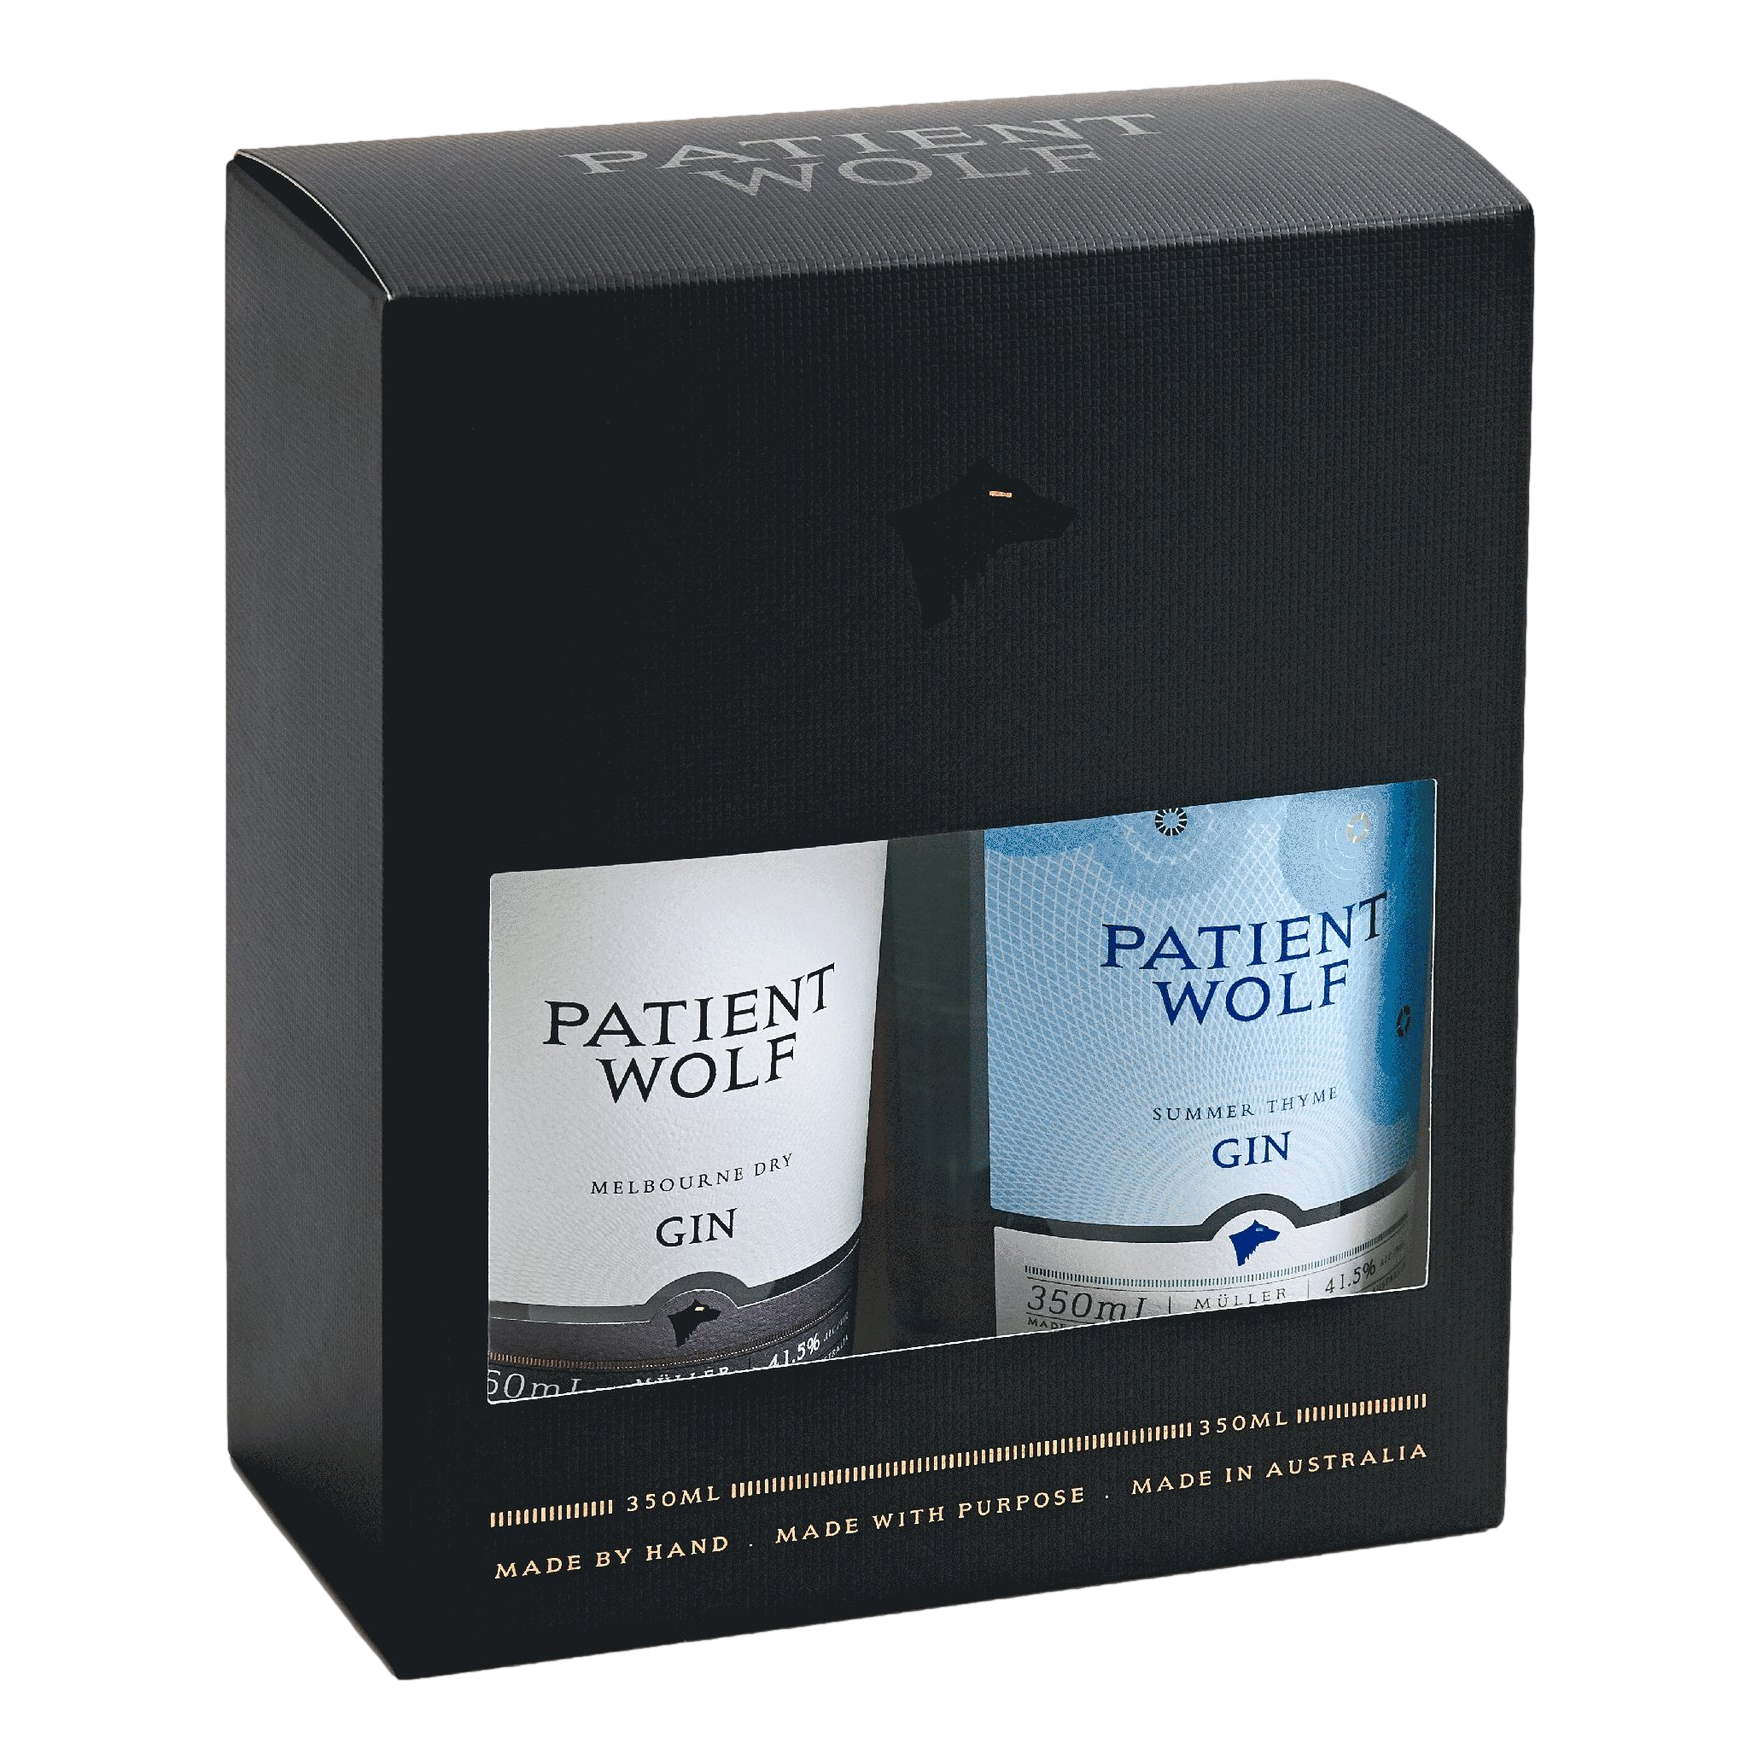 Patient Wolf Melbourne Dry & Summer Thyme Gin 350ml Twin Pack